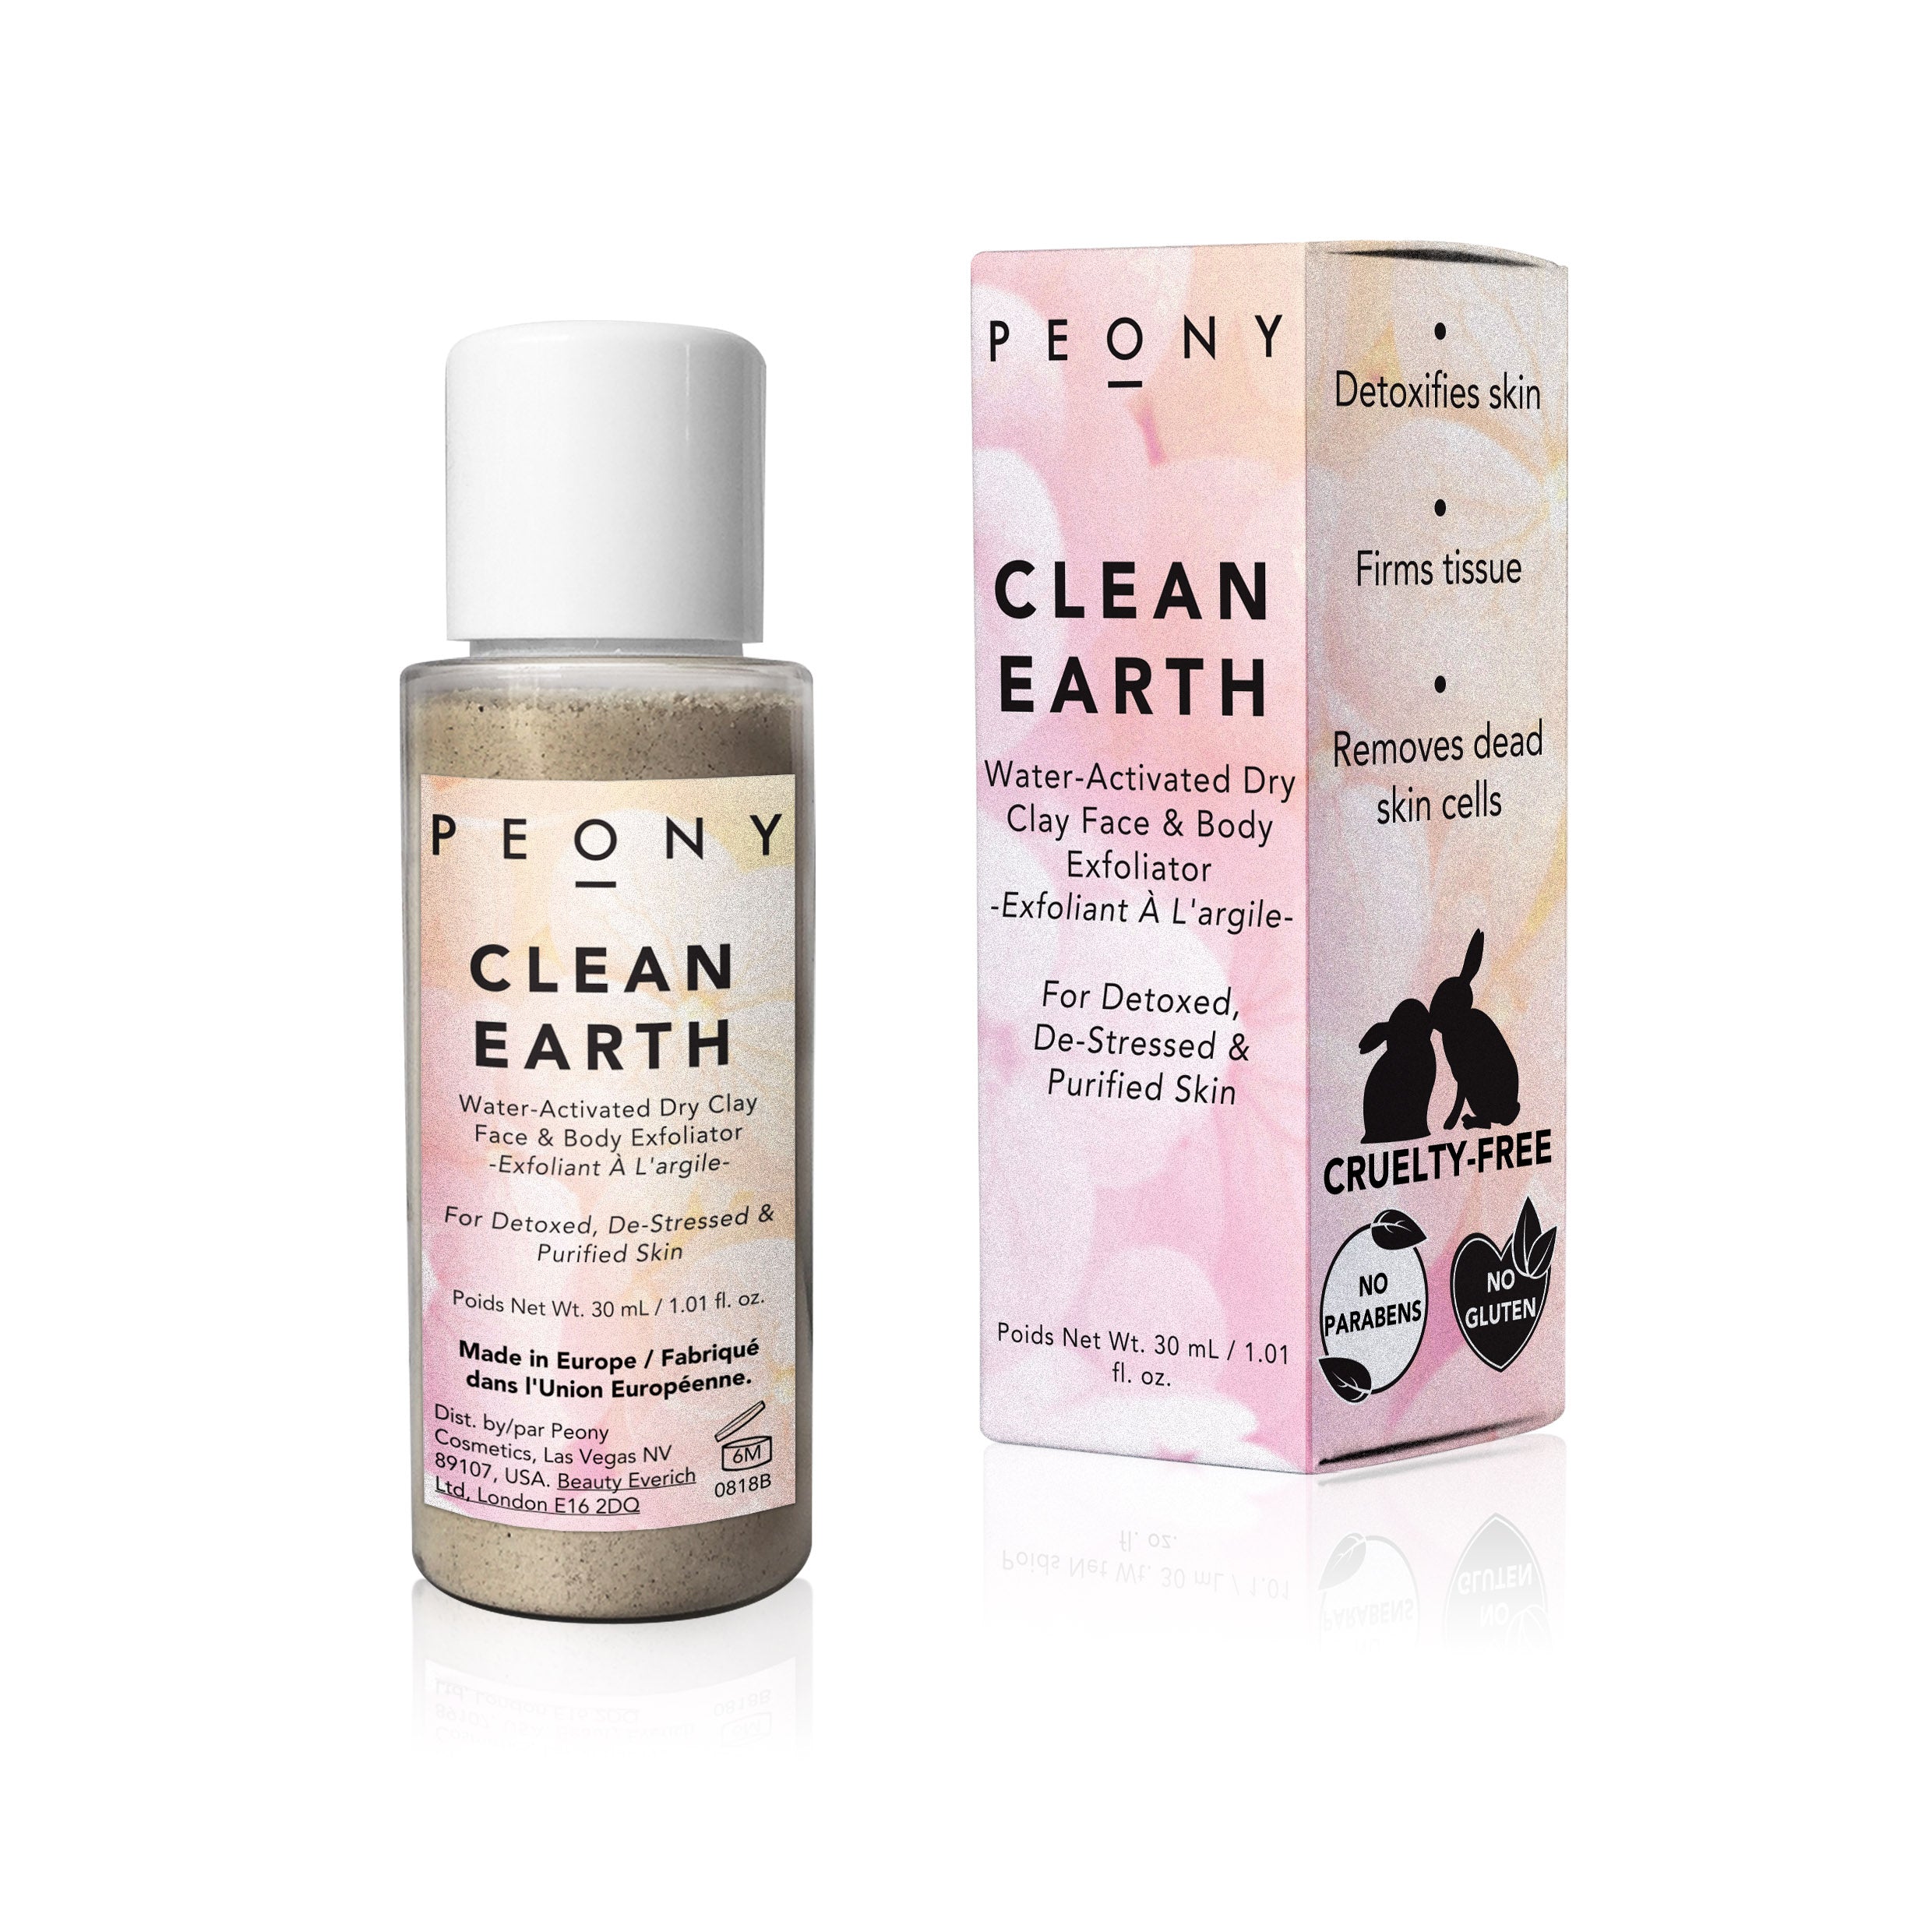 Clean Earth - Water-Activated Dry Clay Face & Body Exfoliator